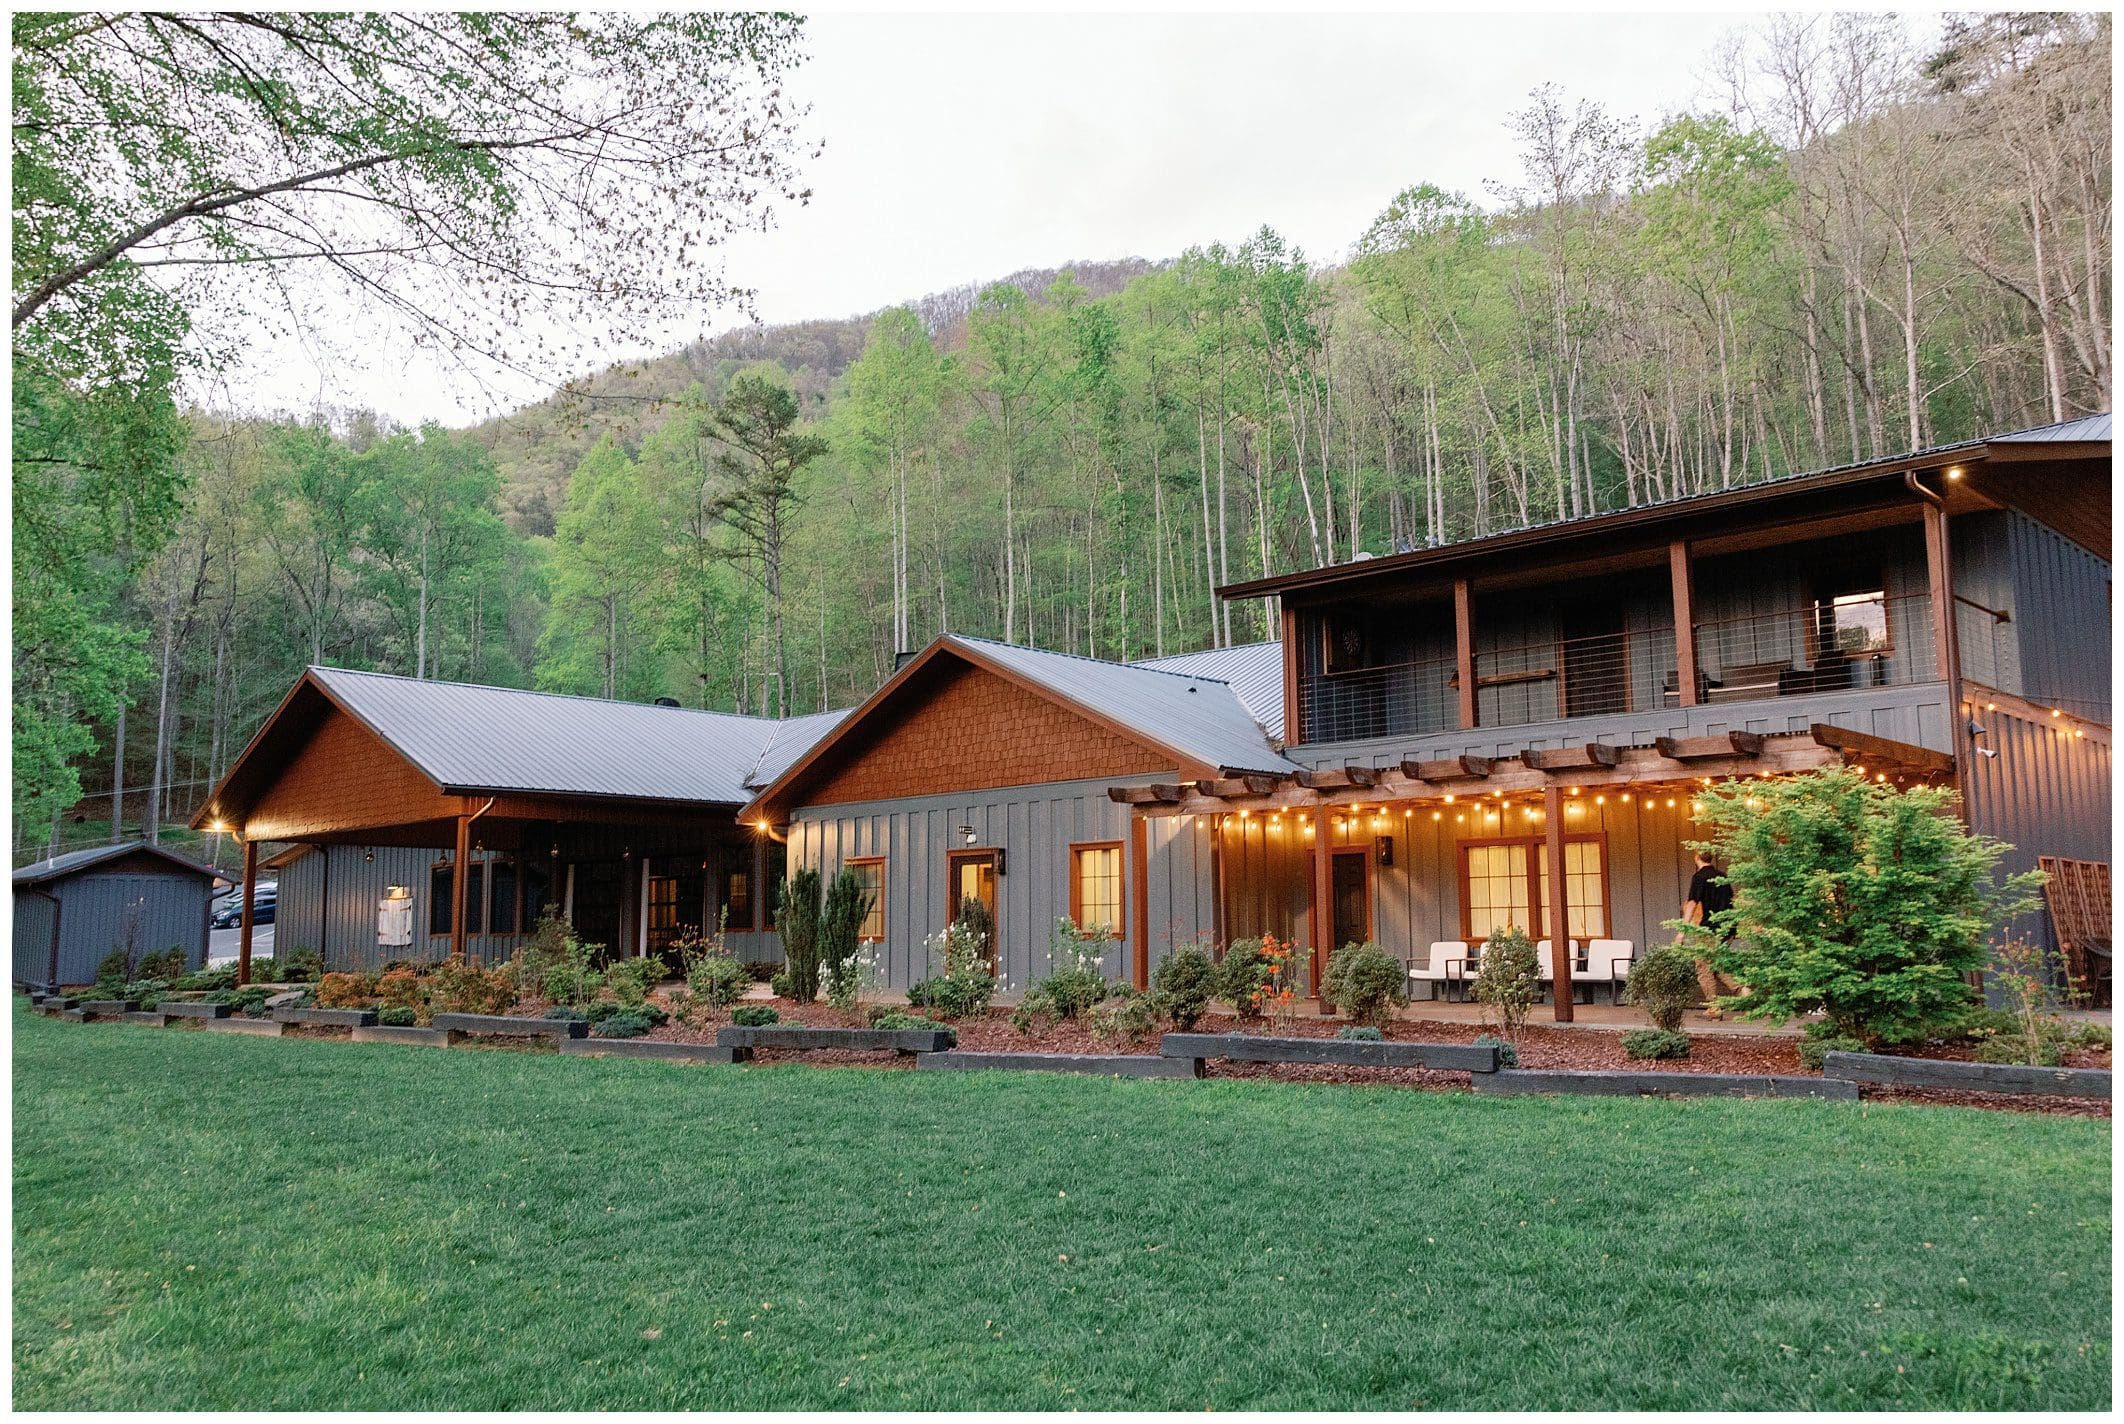 Modern rustic wedding venue with warm lighting, nestled at the base of a lush, tree-covered mountain at dusk.